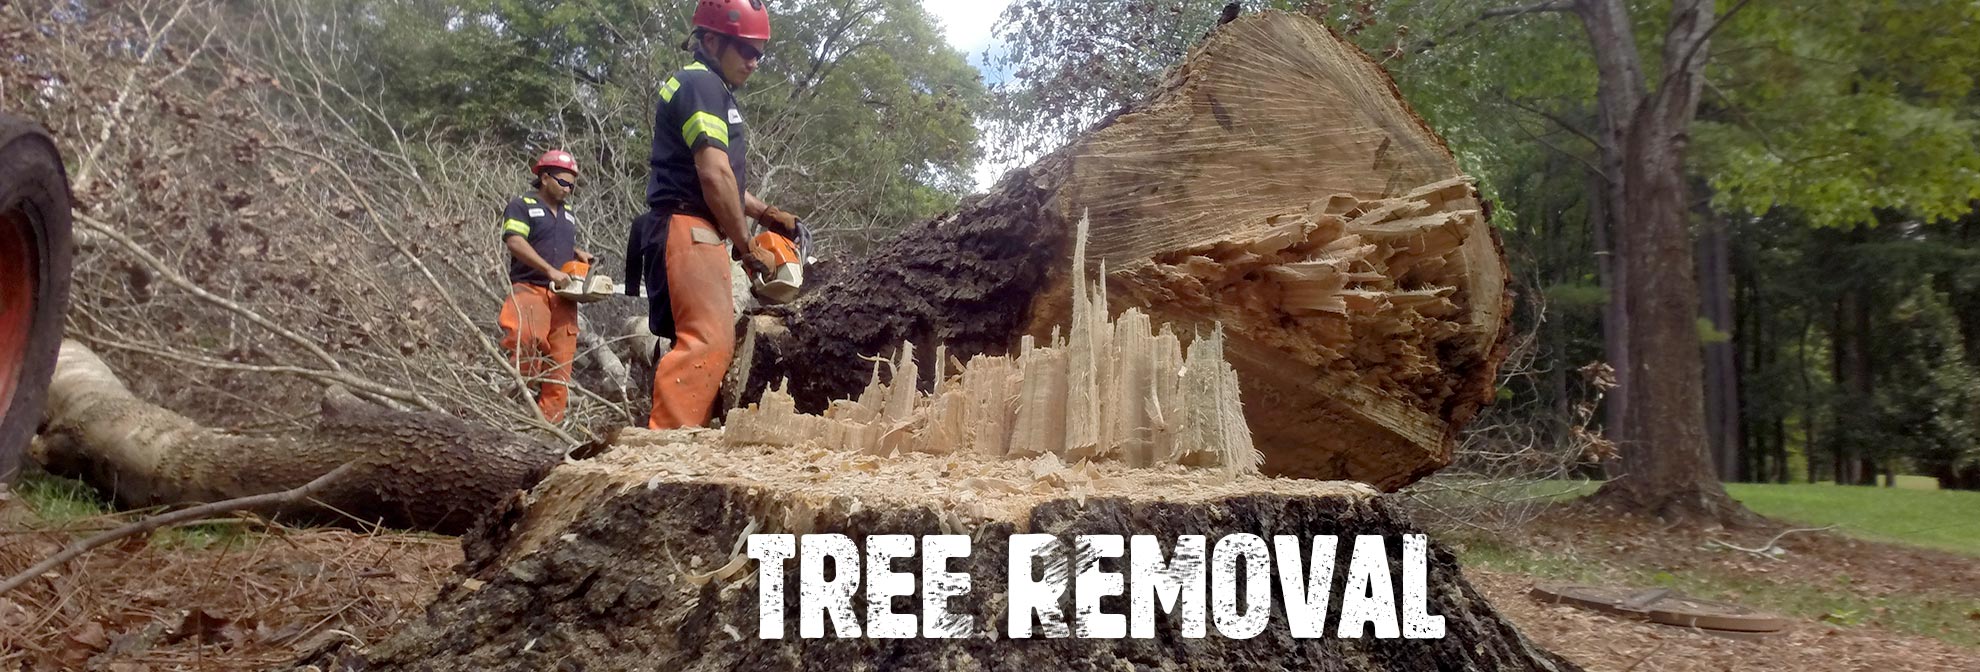 tree removal melbourne